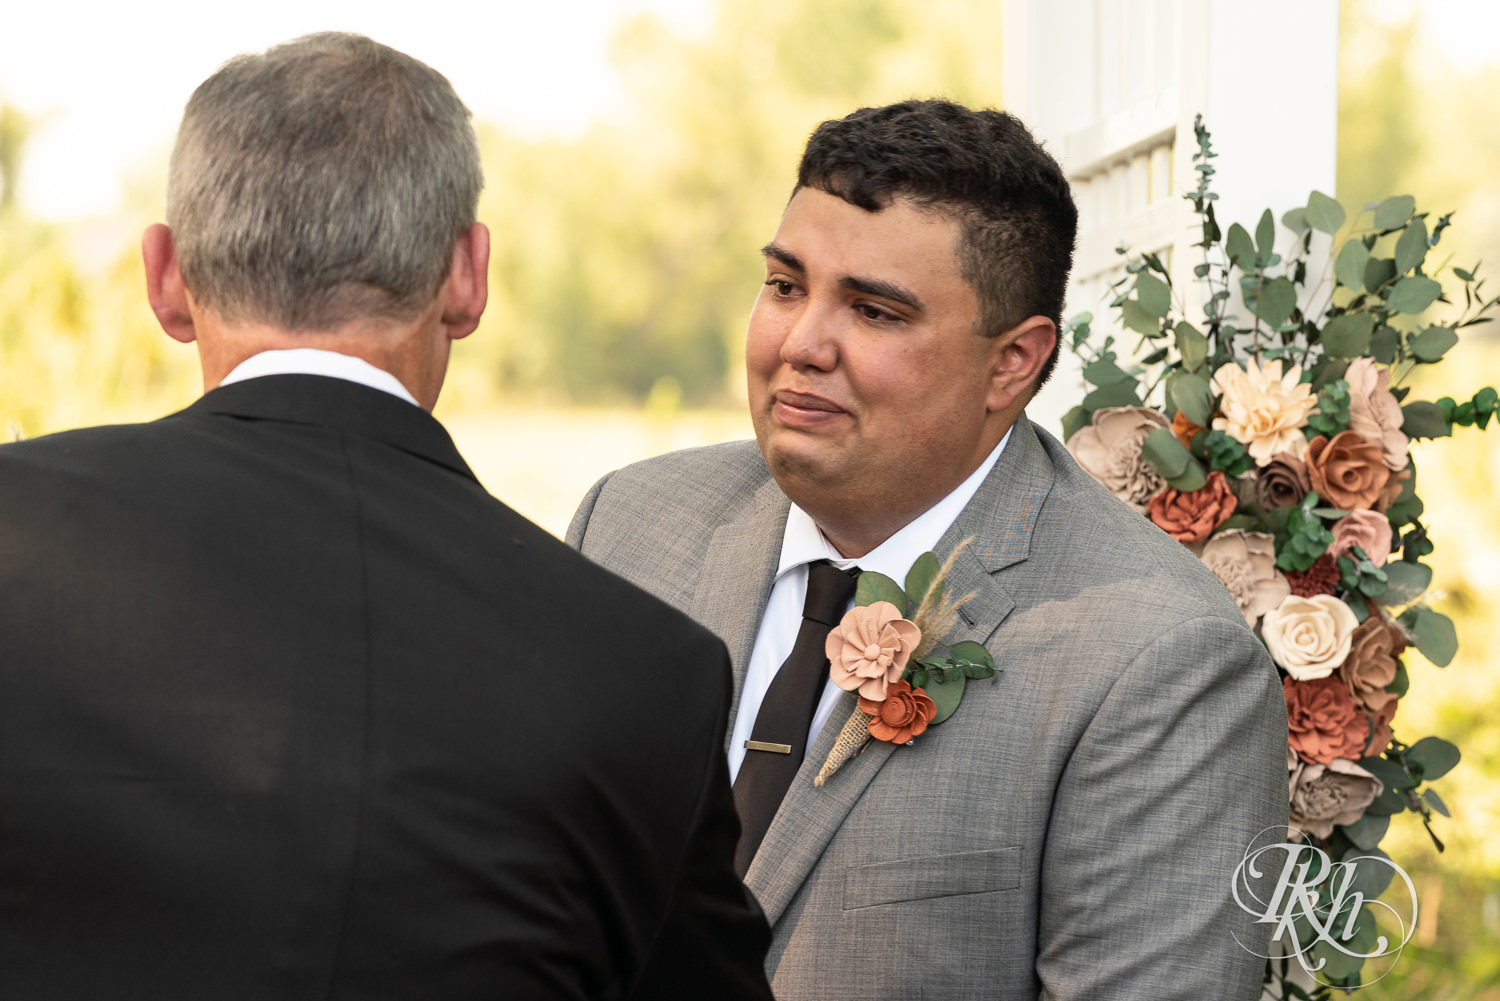 Groom cries seeing bride walking down the aisle at Cottage Farmhouse in Glencoe, Minnesota.